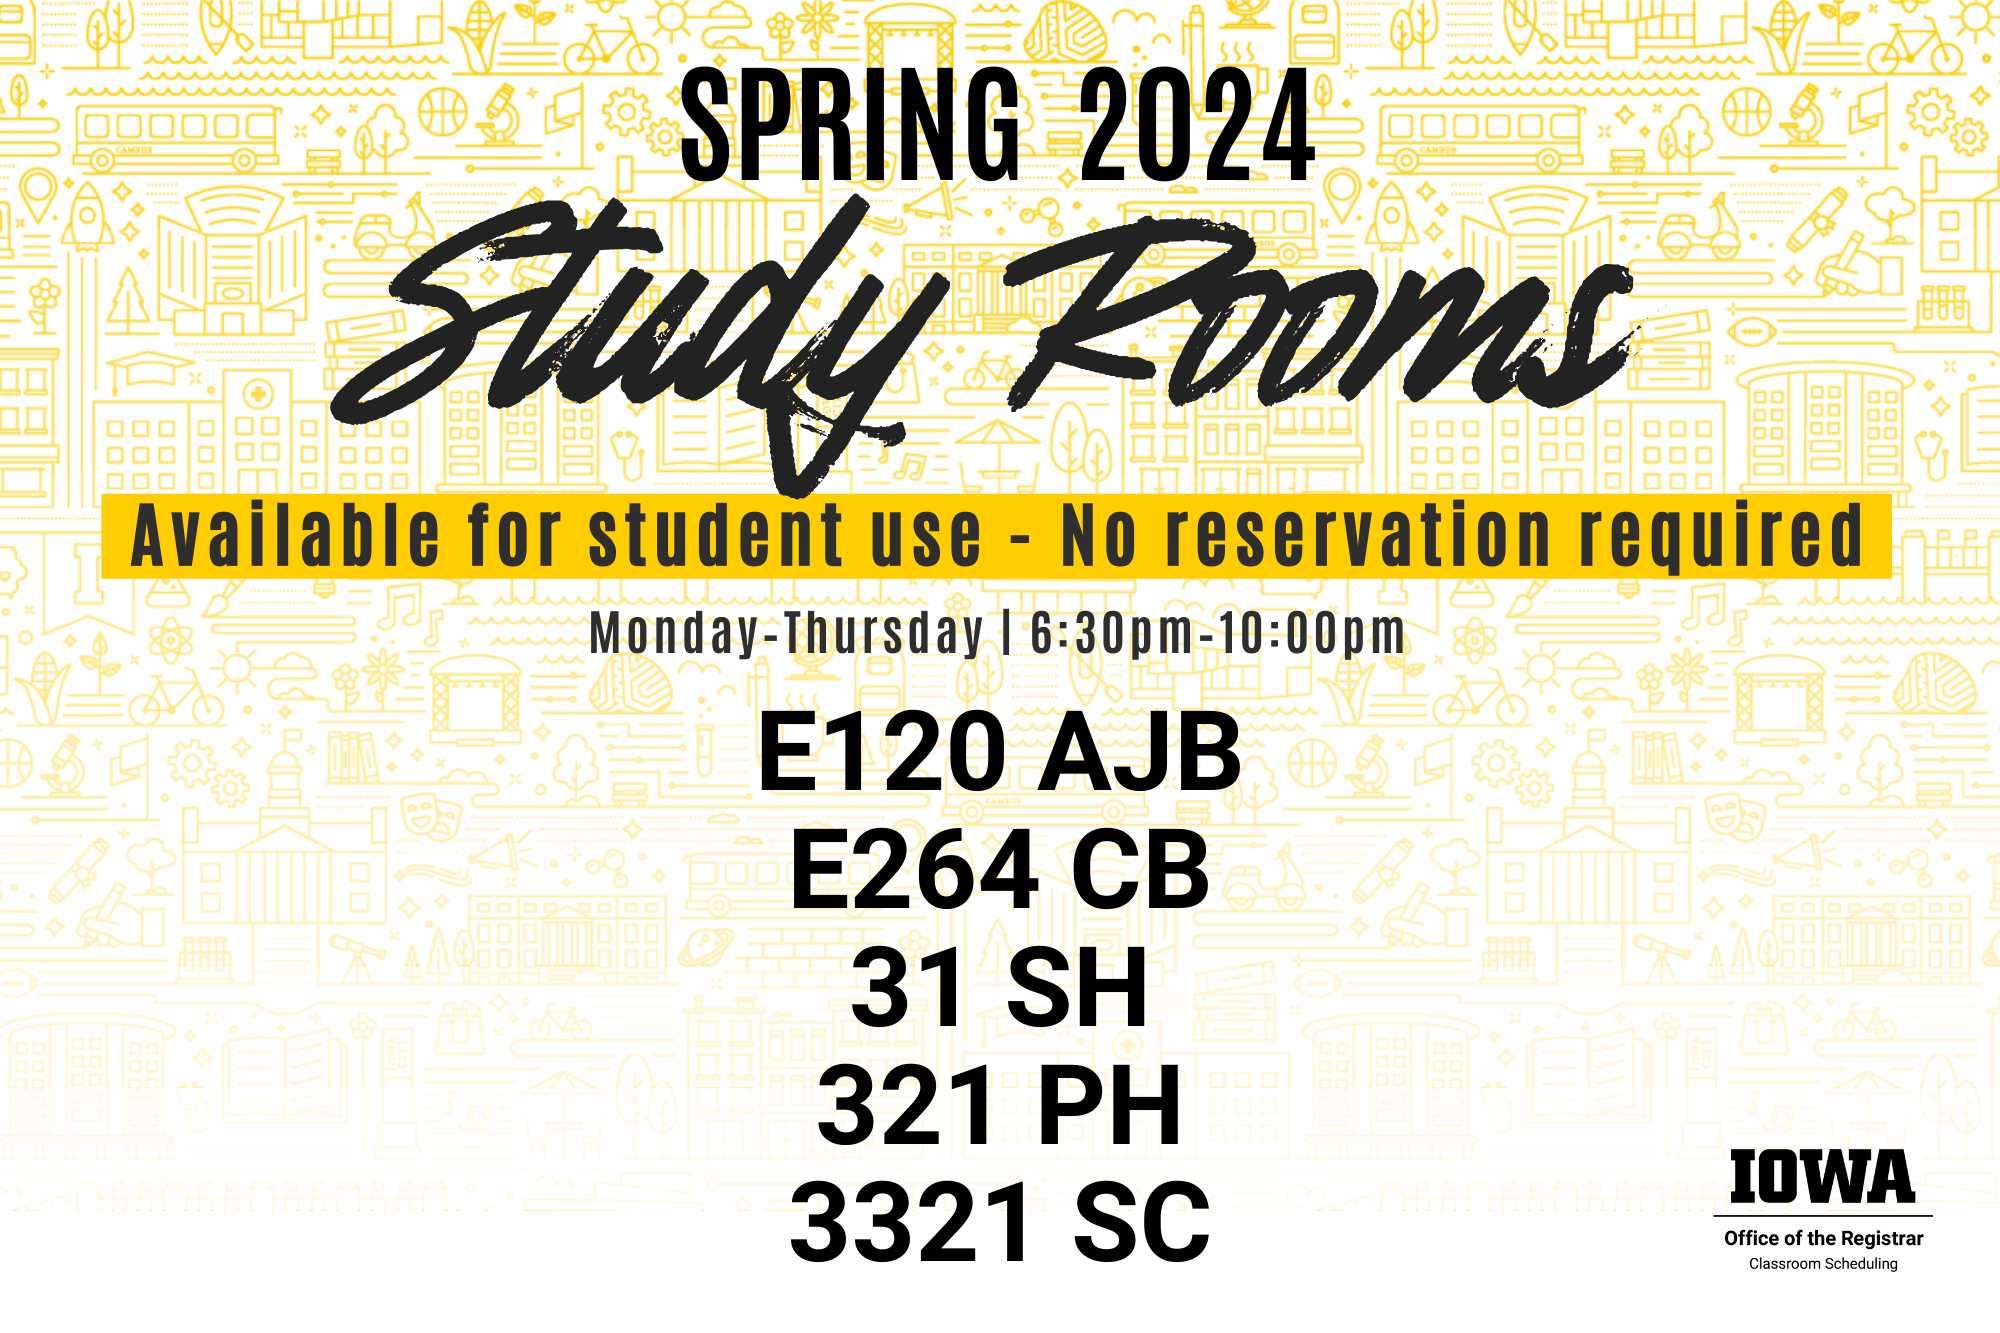 Spring 2024 Study Rooms. Available for student use, no reservation required. Monday-Thursday, 6:30 p.m. to 10 p.m. E120 AJB, E264 CB, 31 SH, 321 PH, 3321 SC. 